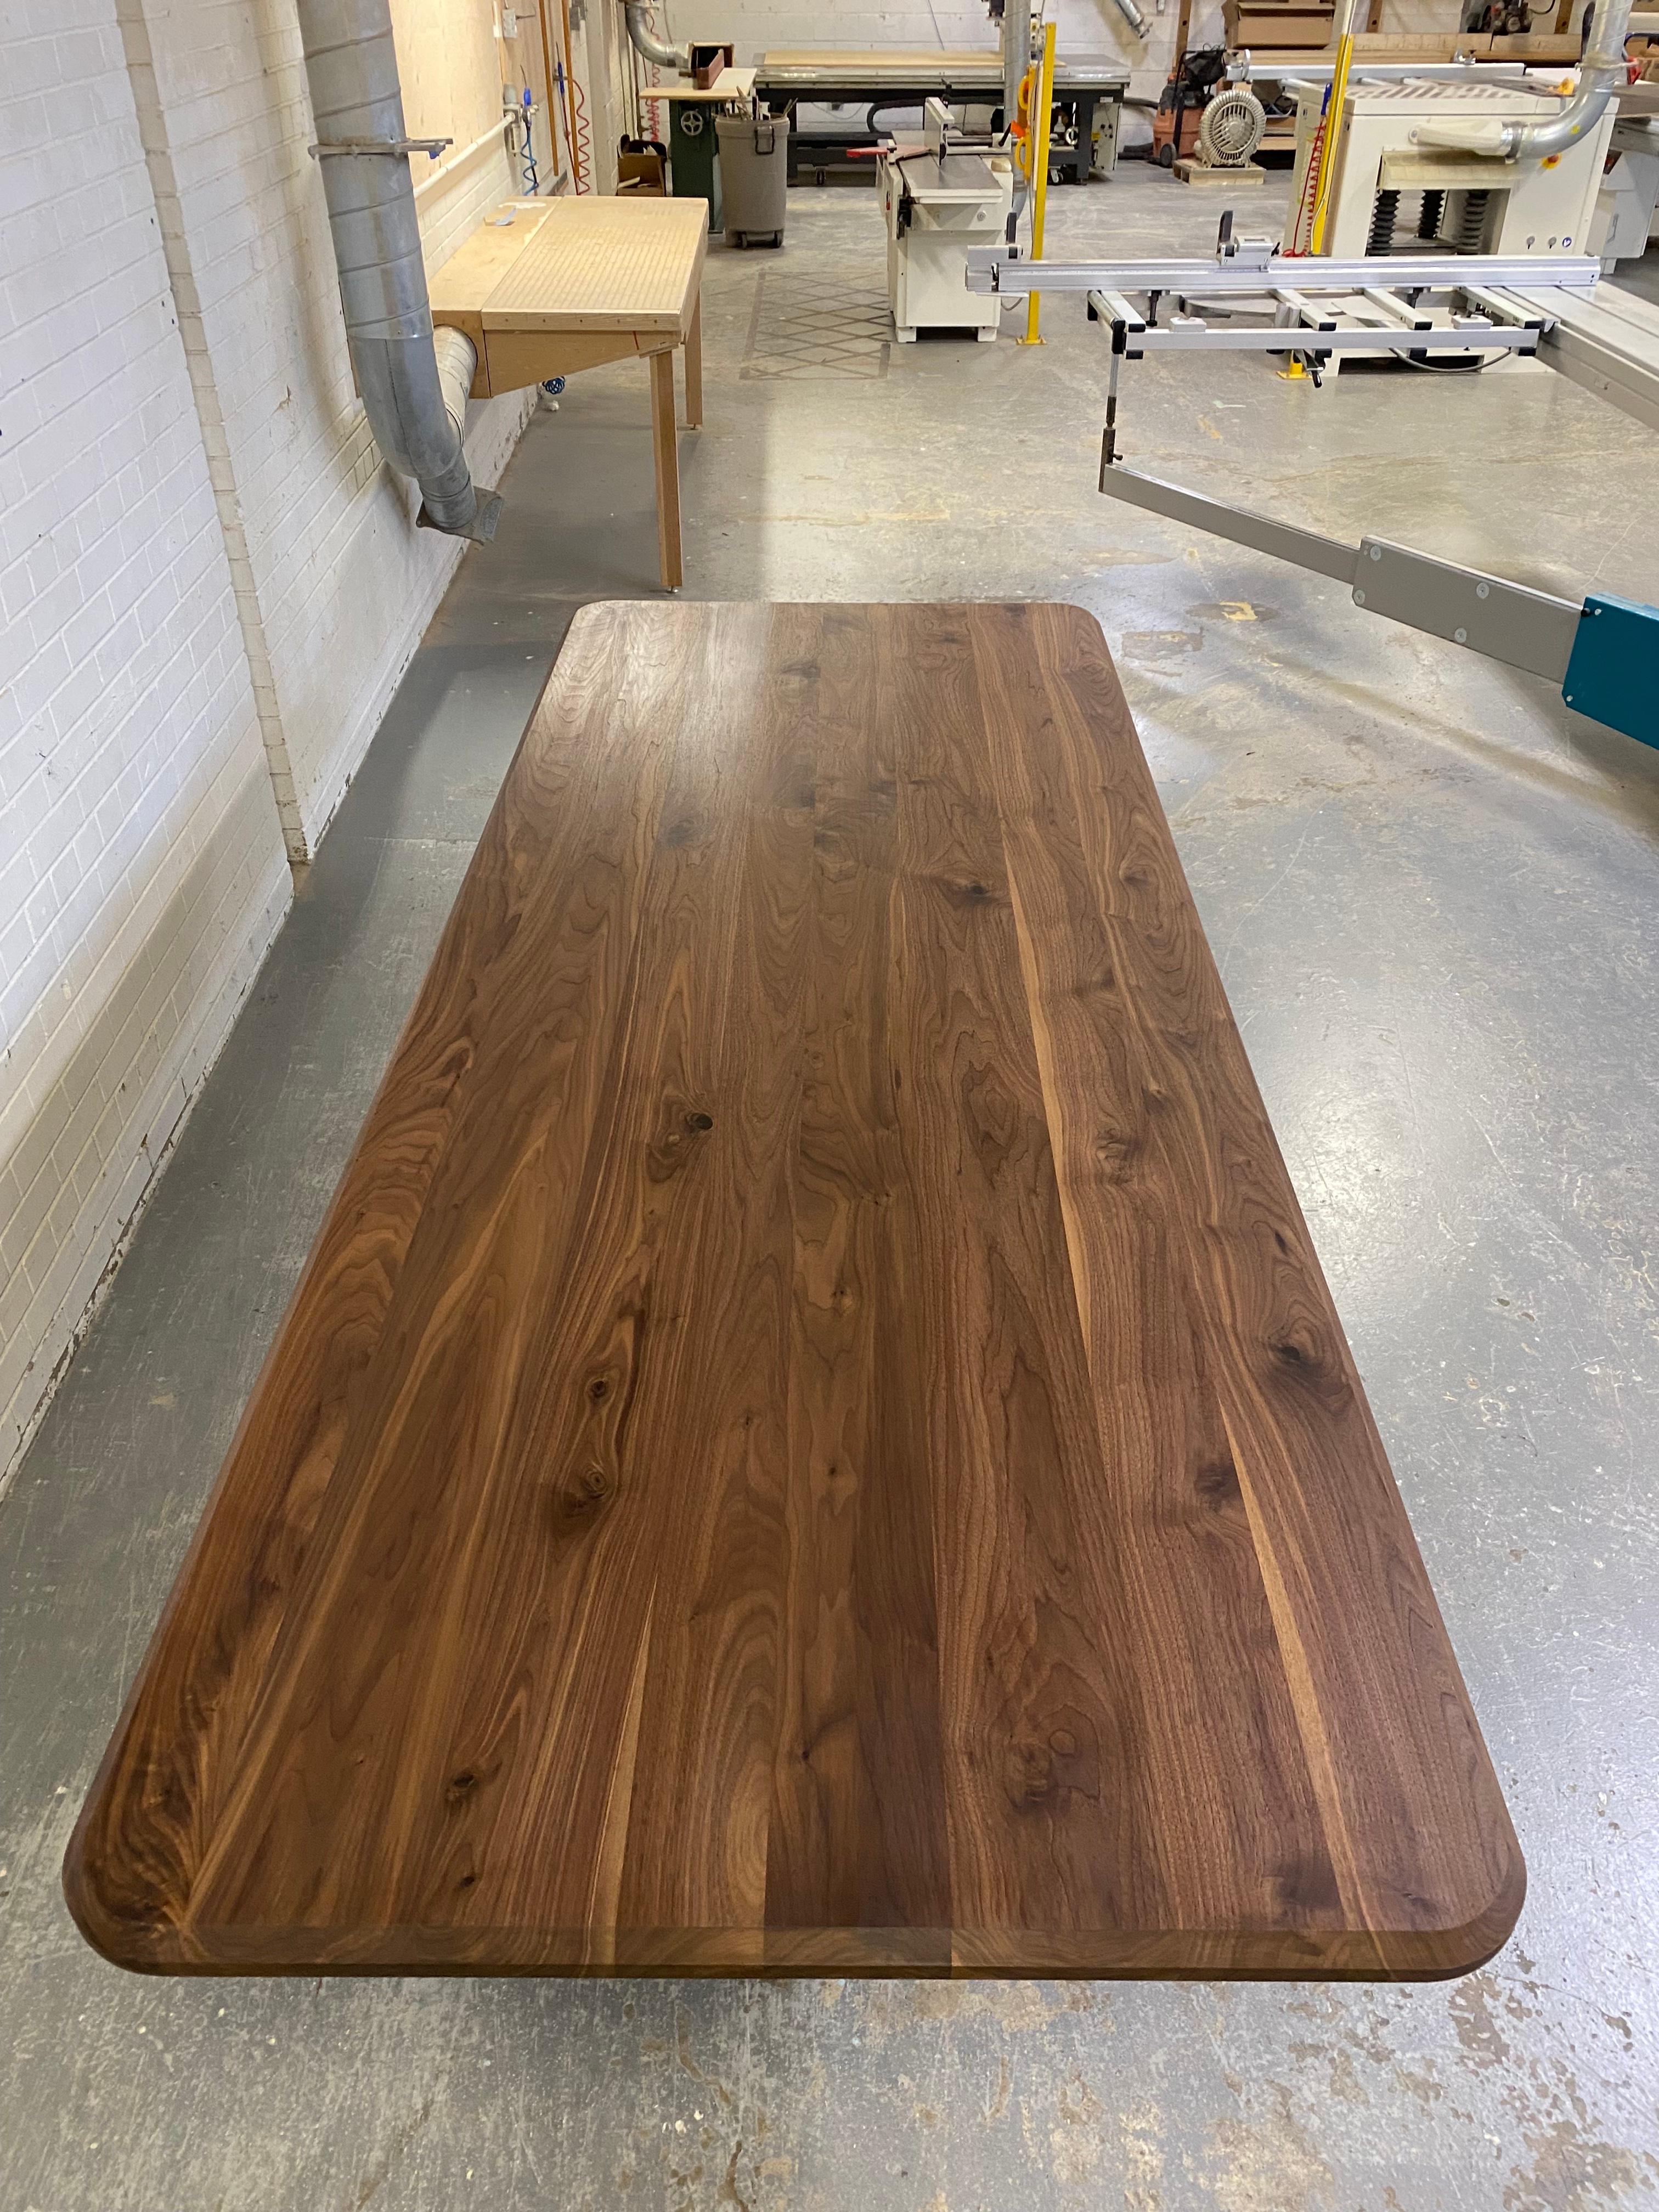 Handcrafted Oiled Walnut Geomorph Dining Table 96